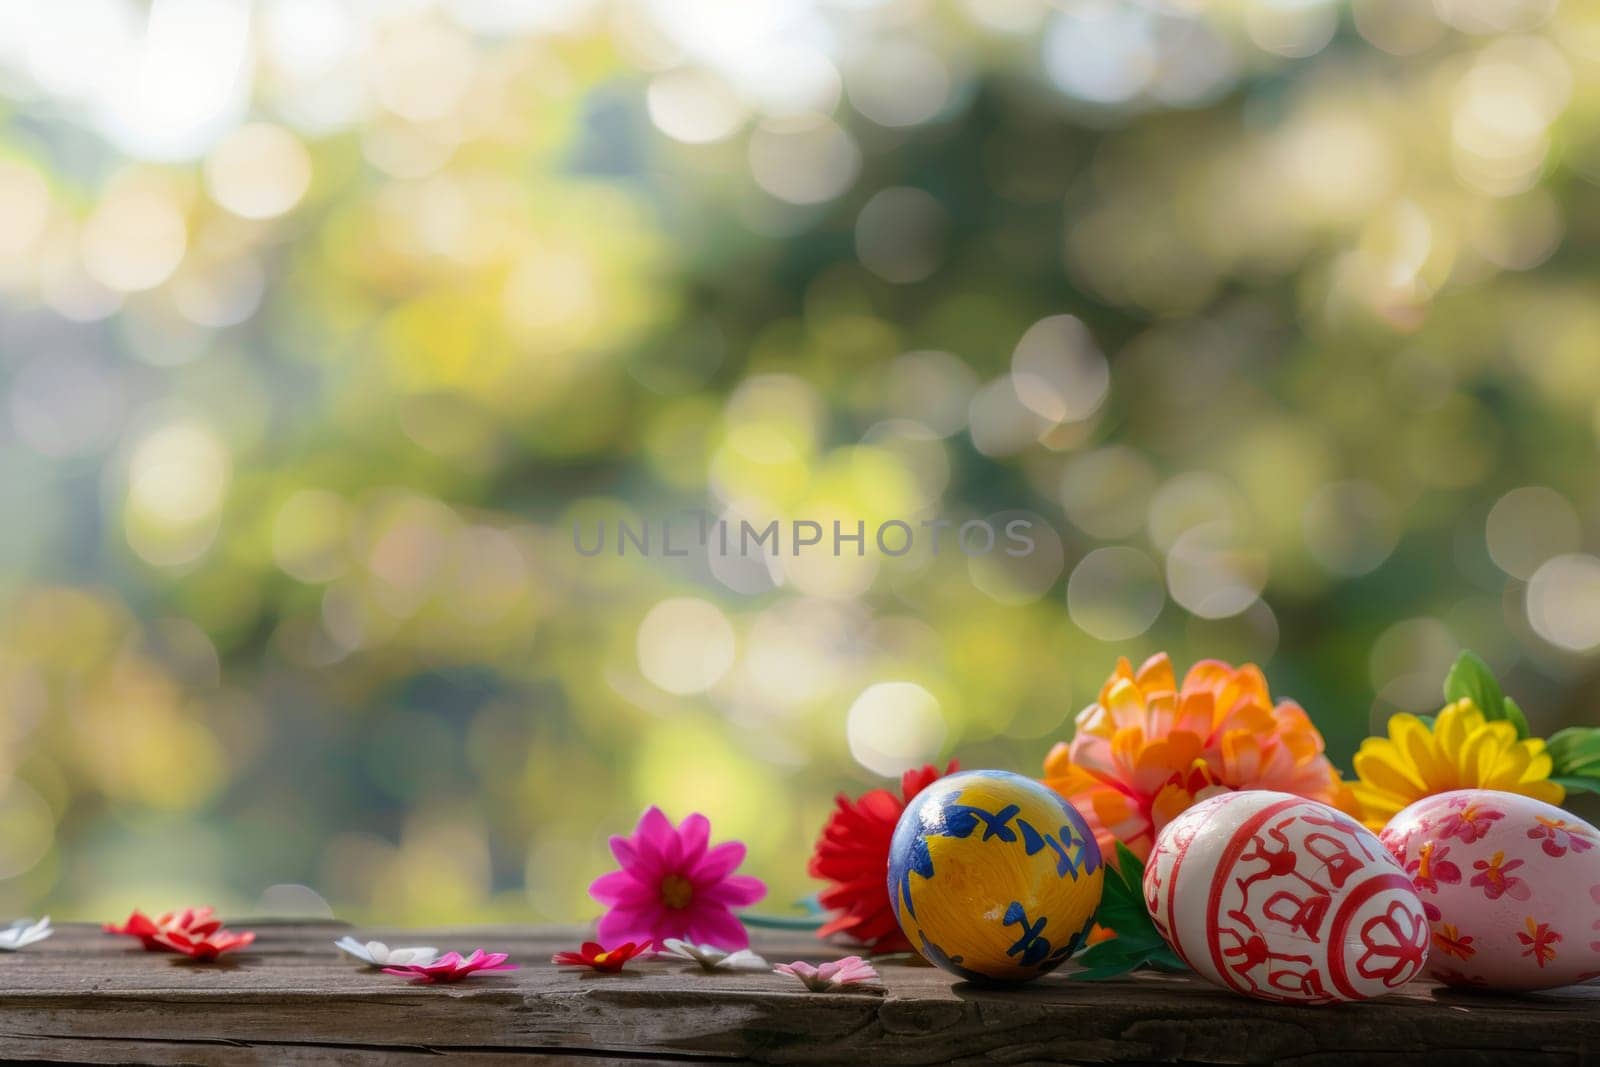 A bunch of Easter eggs are on a wooden table with flowers in the background. The eggs are of different colors and sizes, and the flowers are pink and yellow. Concept of celebration and joy